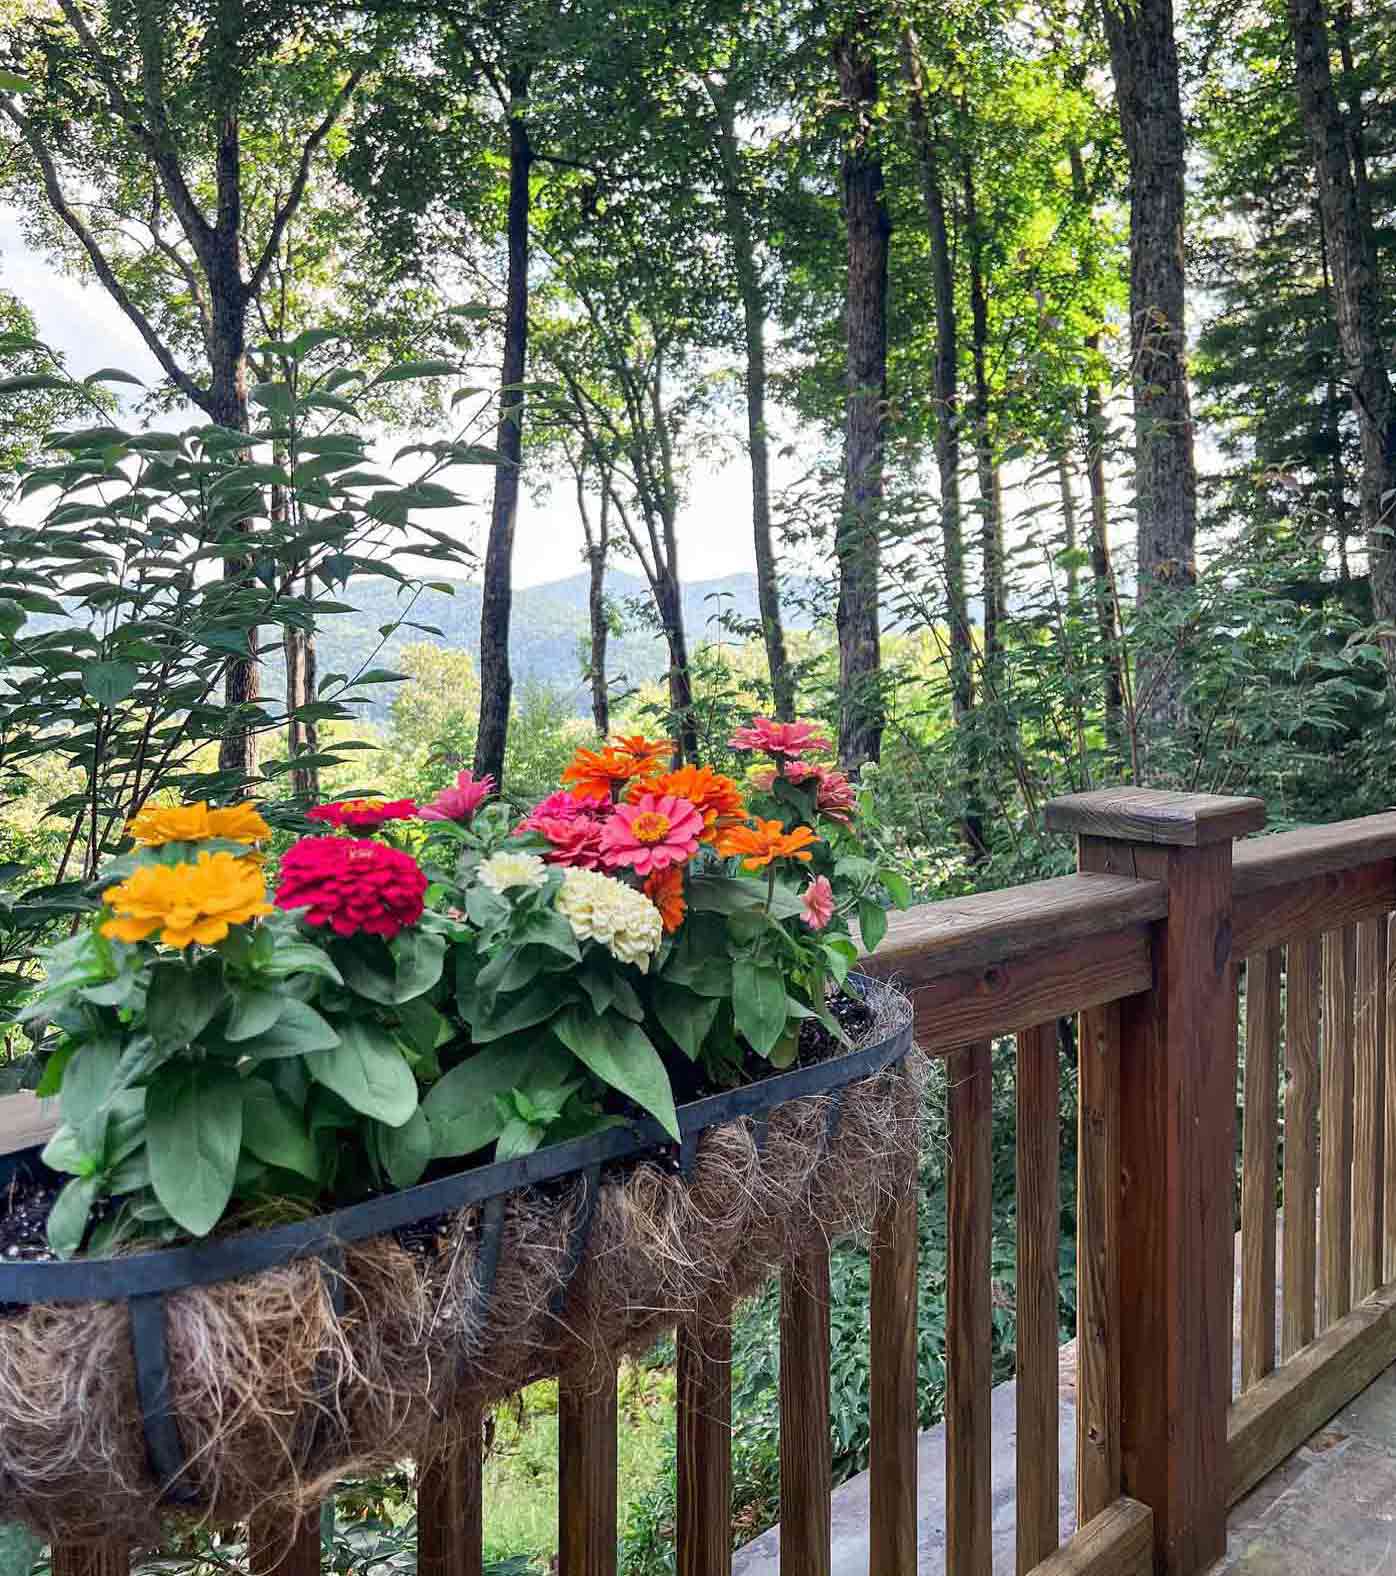 Colorful flower pot hanging on wooden railing